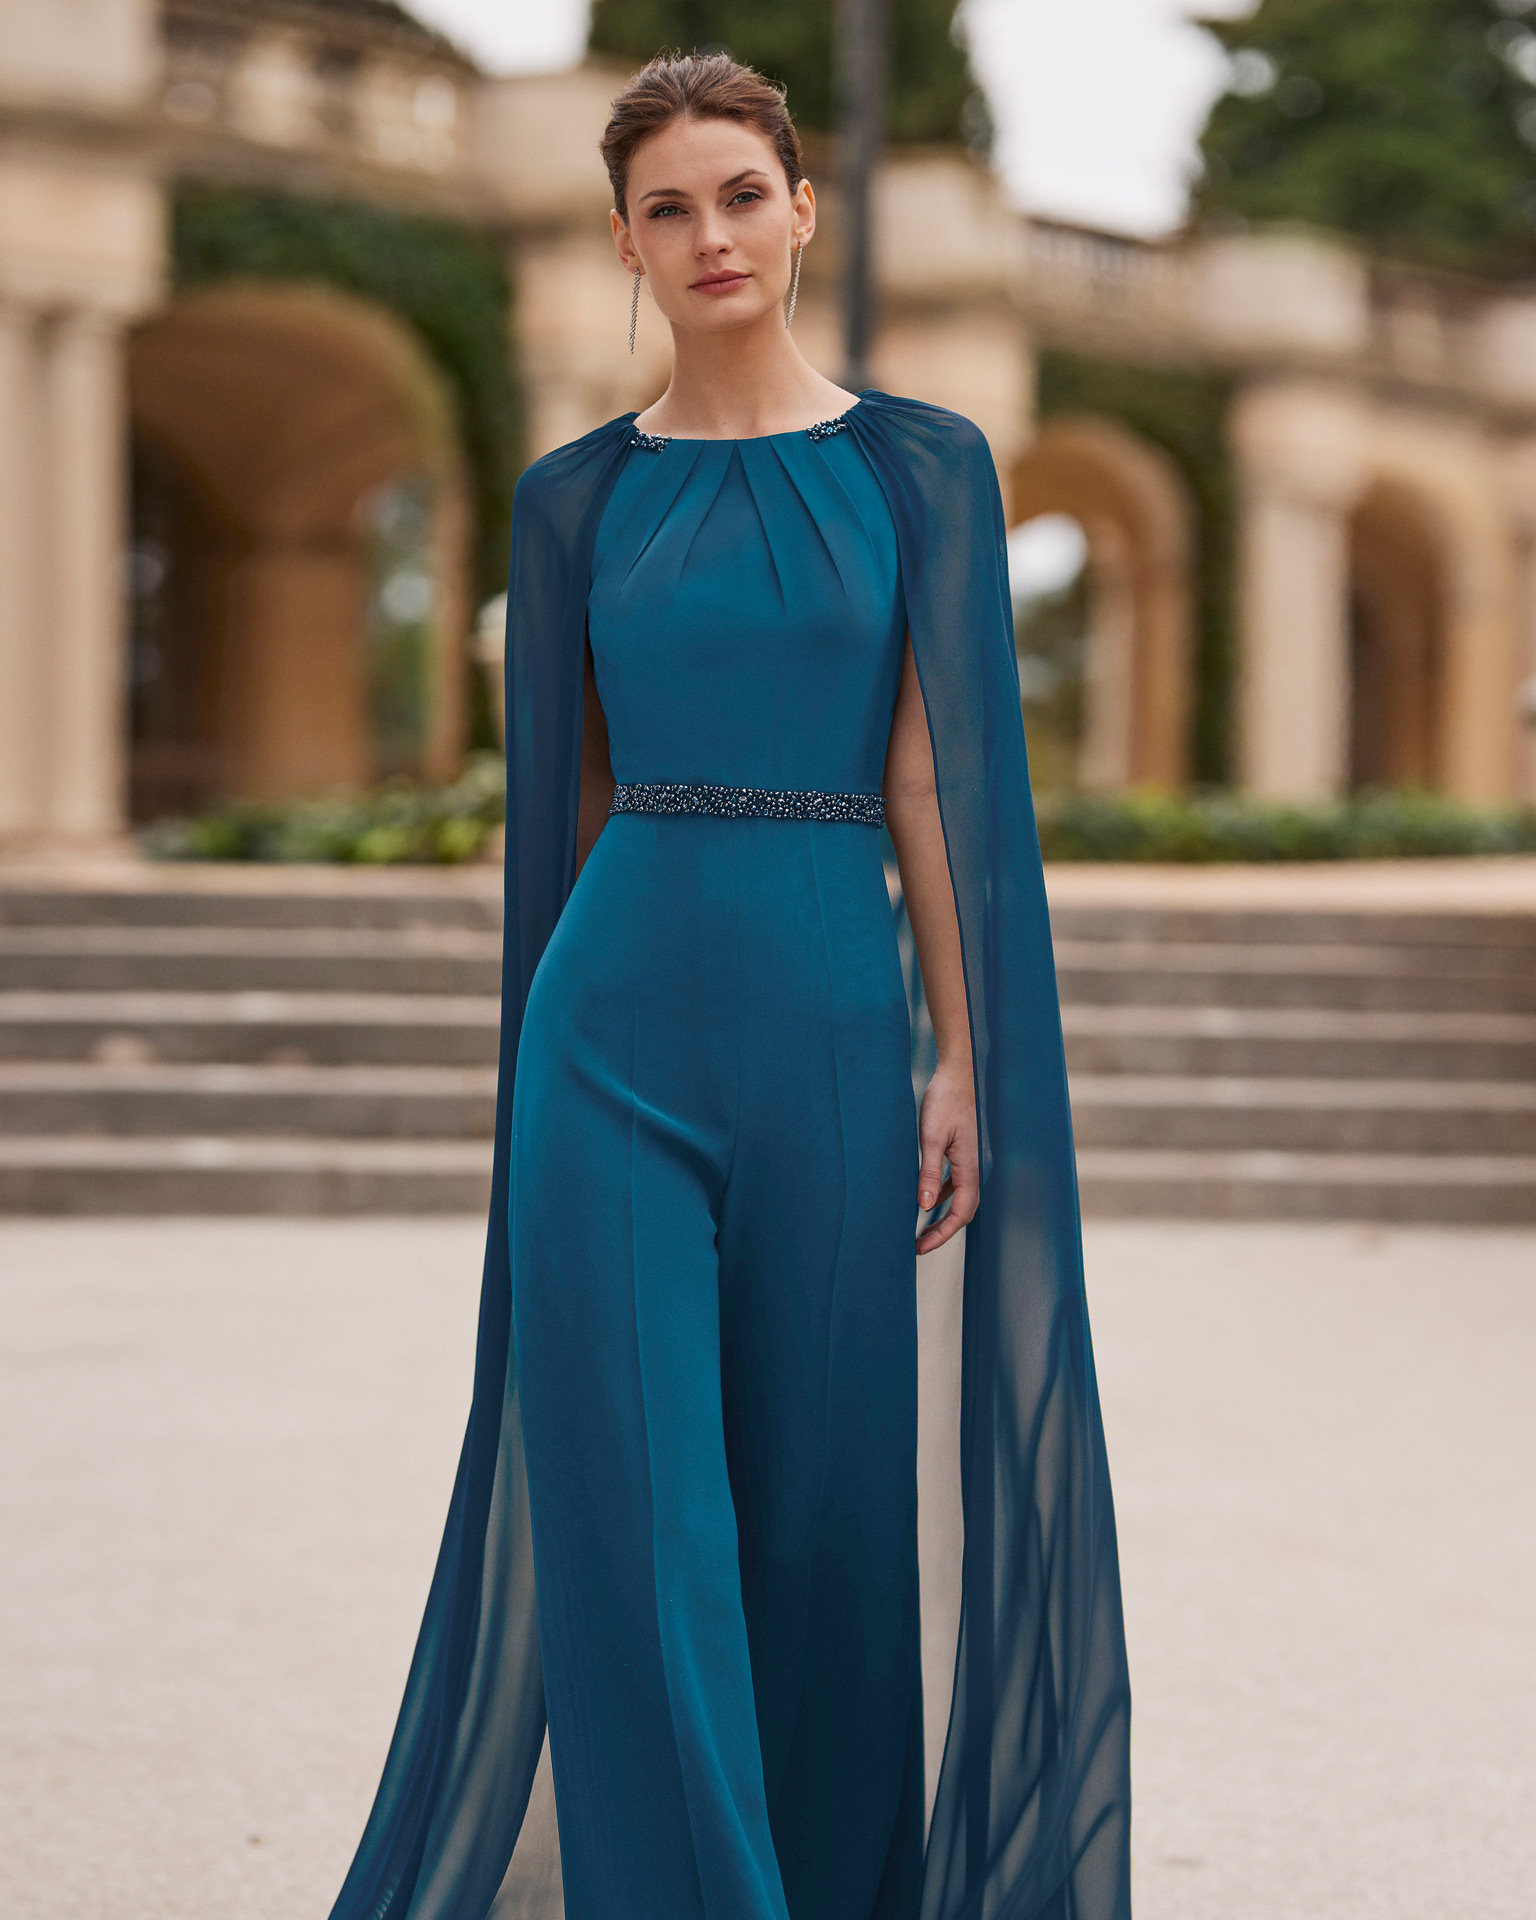 Elegant guest pantsuit. Made with triacetate and beadwork. With round neckline and cape sleeves. Couture Club design. MARFIL_BARCELONA.